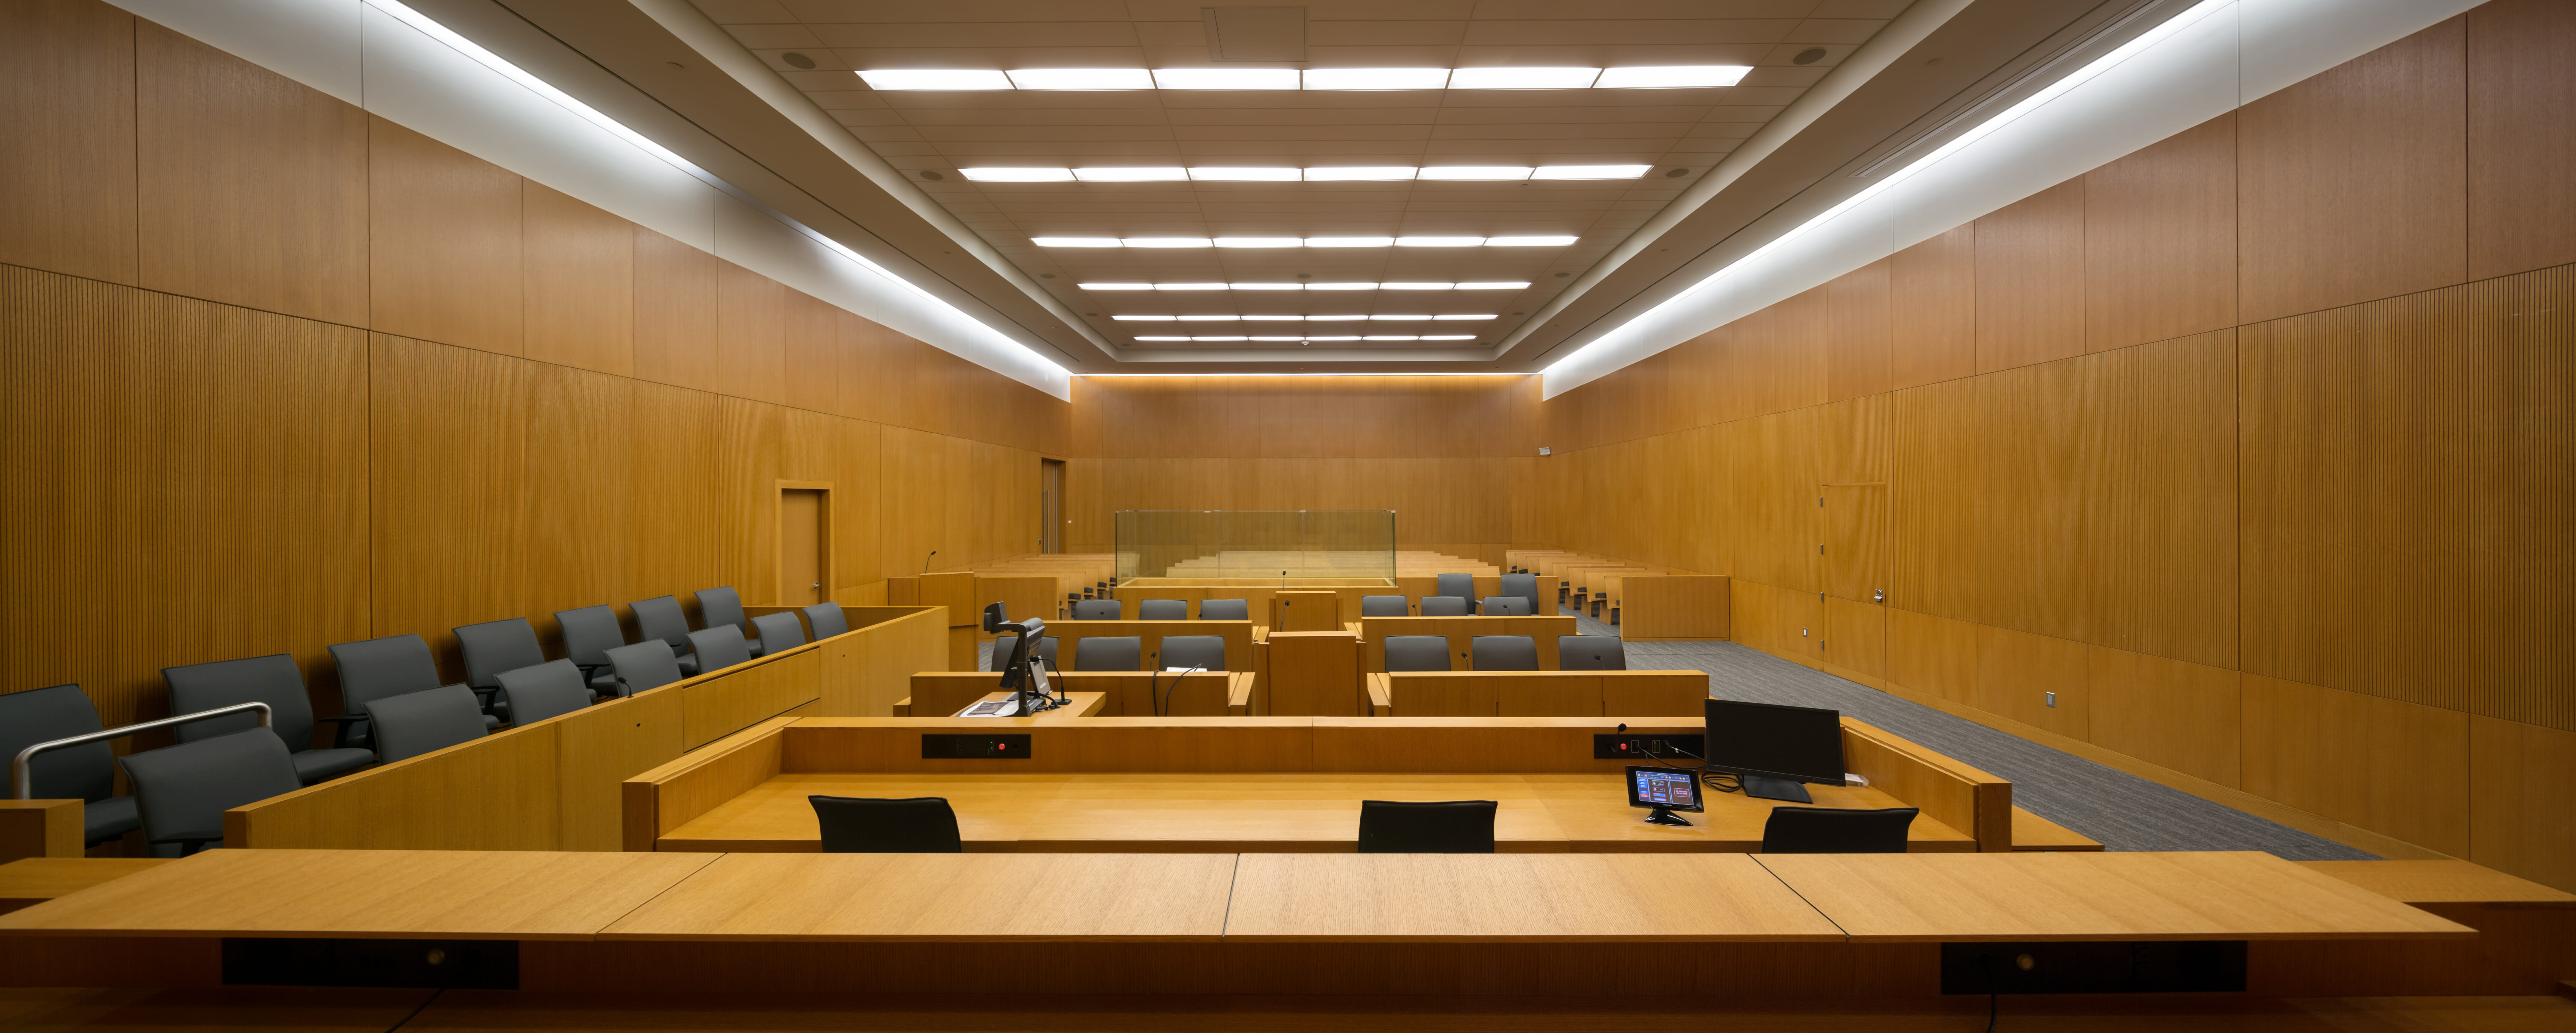 Large Loss Property Subrogation Image, Wide angle panoramic view of a new courtroom from the Bench